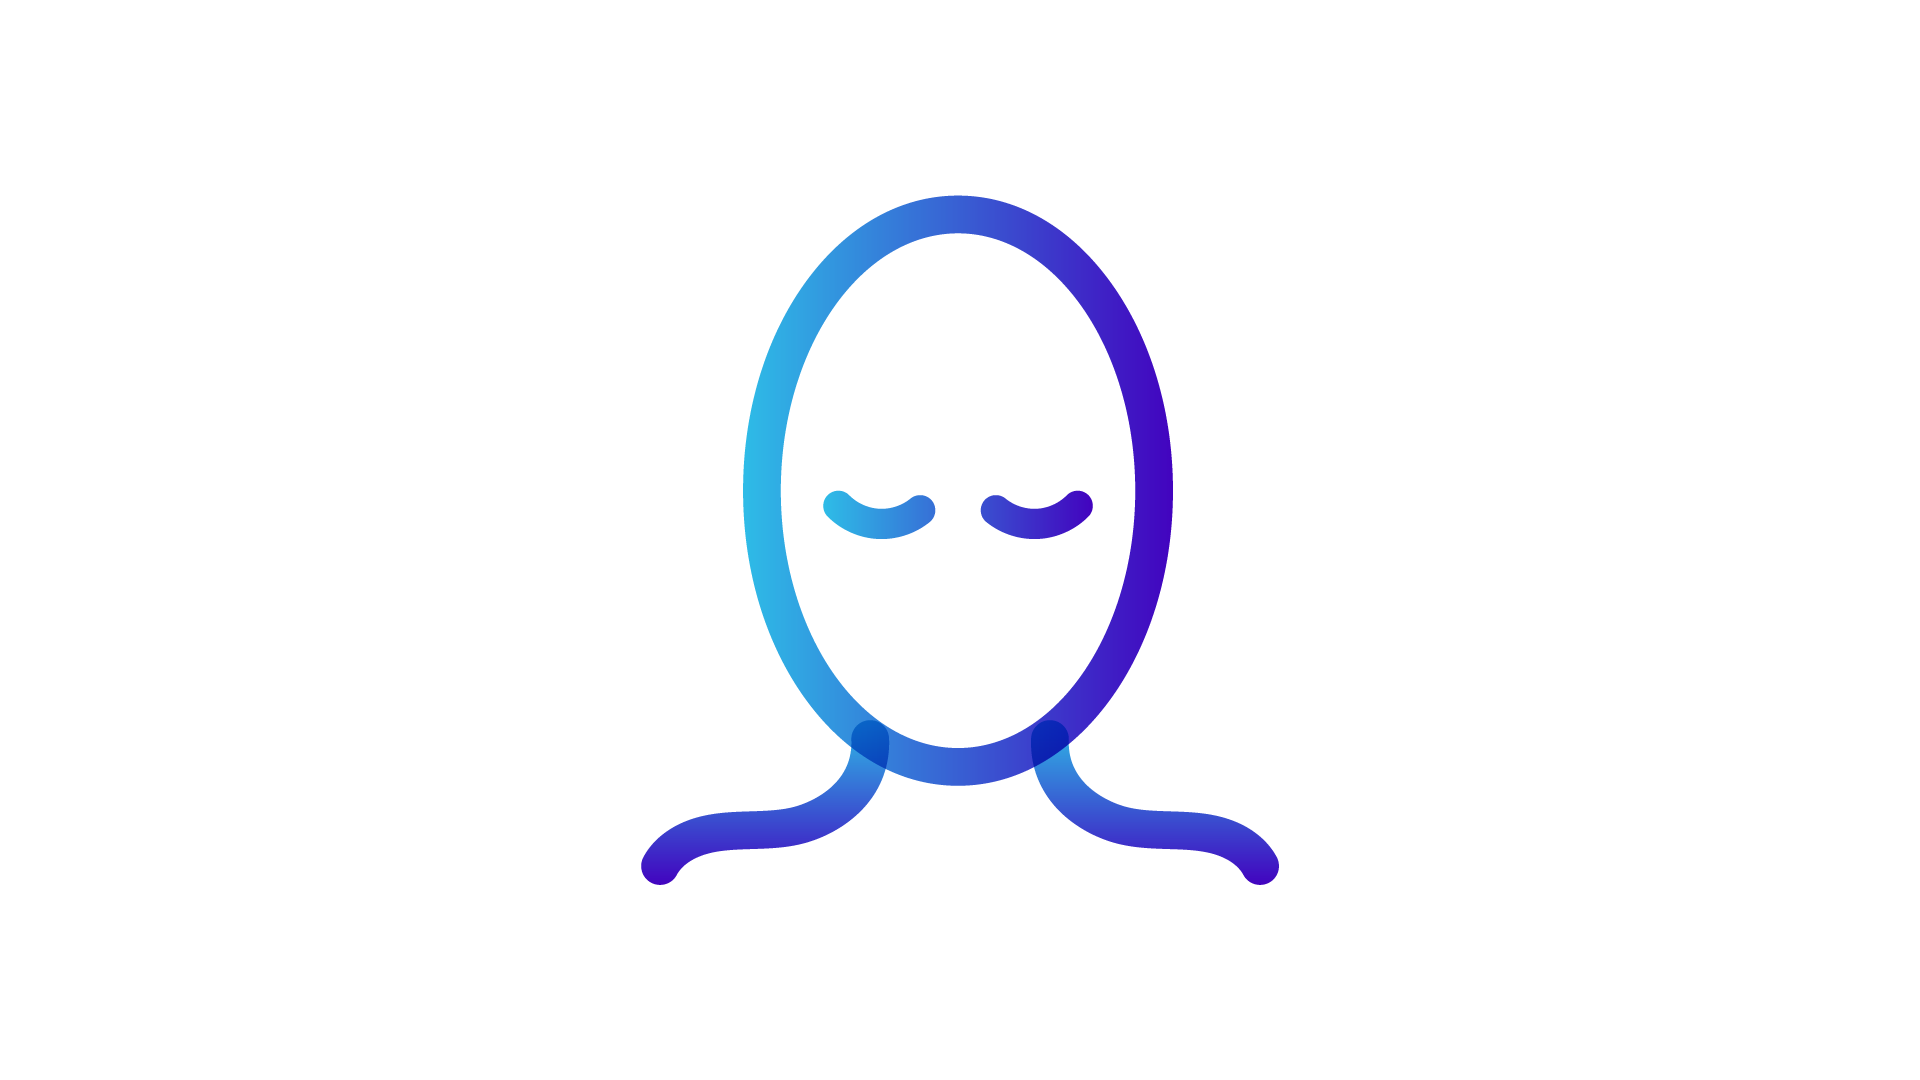 person with eyes down/closed icon